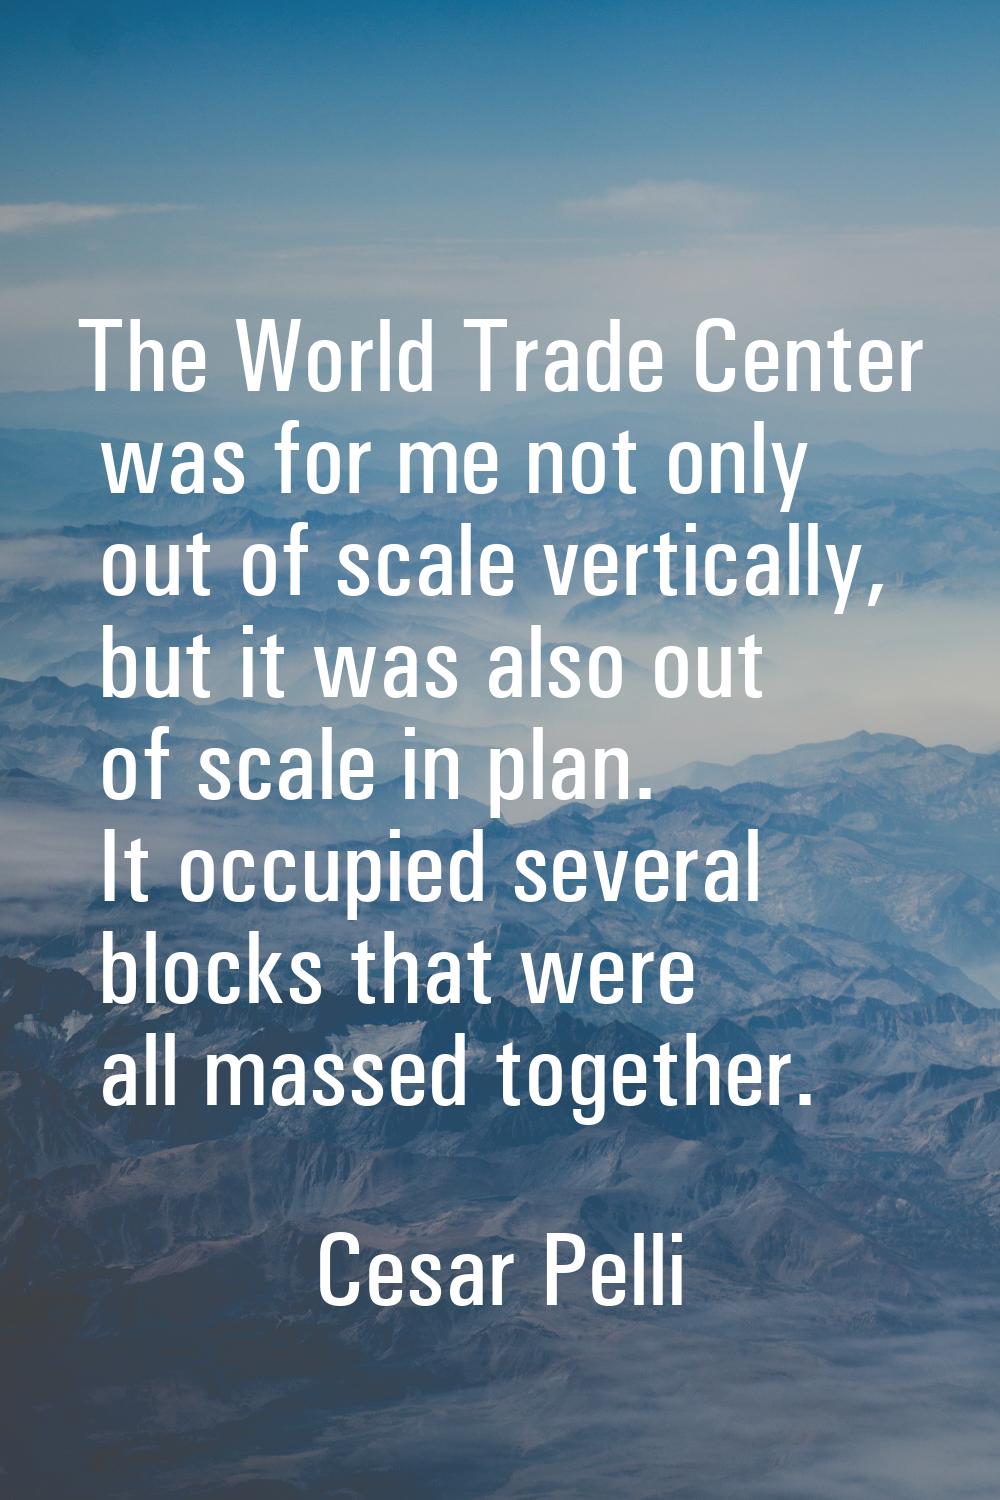 The World Trade Center was for me not only out of scale vertically, but it was also out of scale in